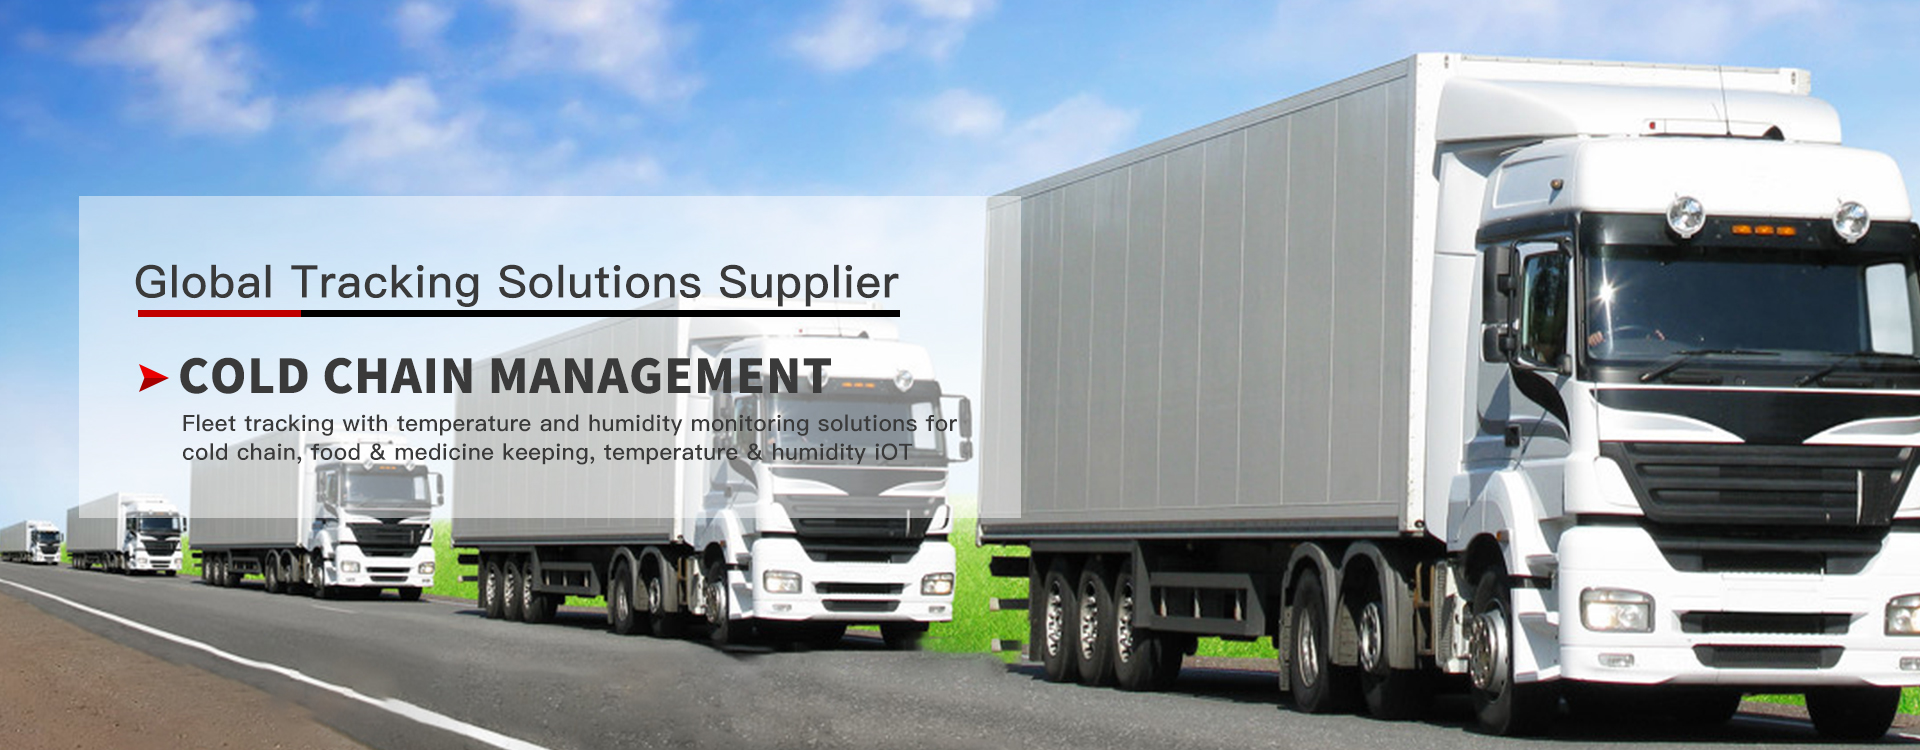 Cold_Chain_Management